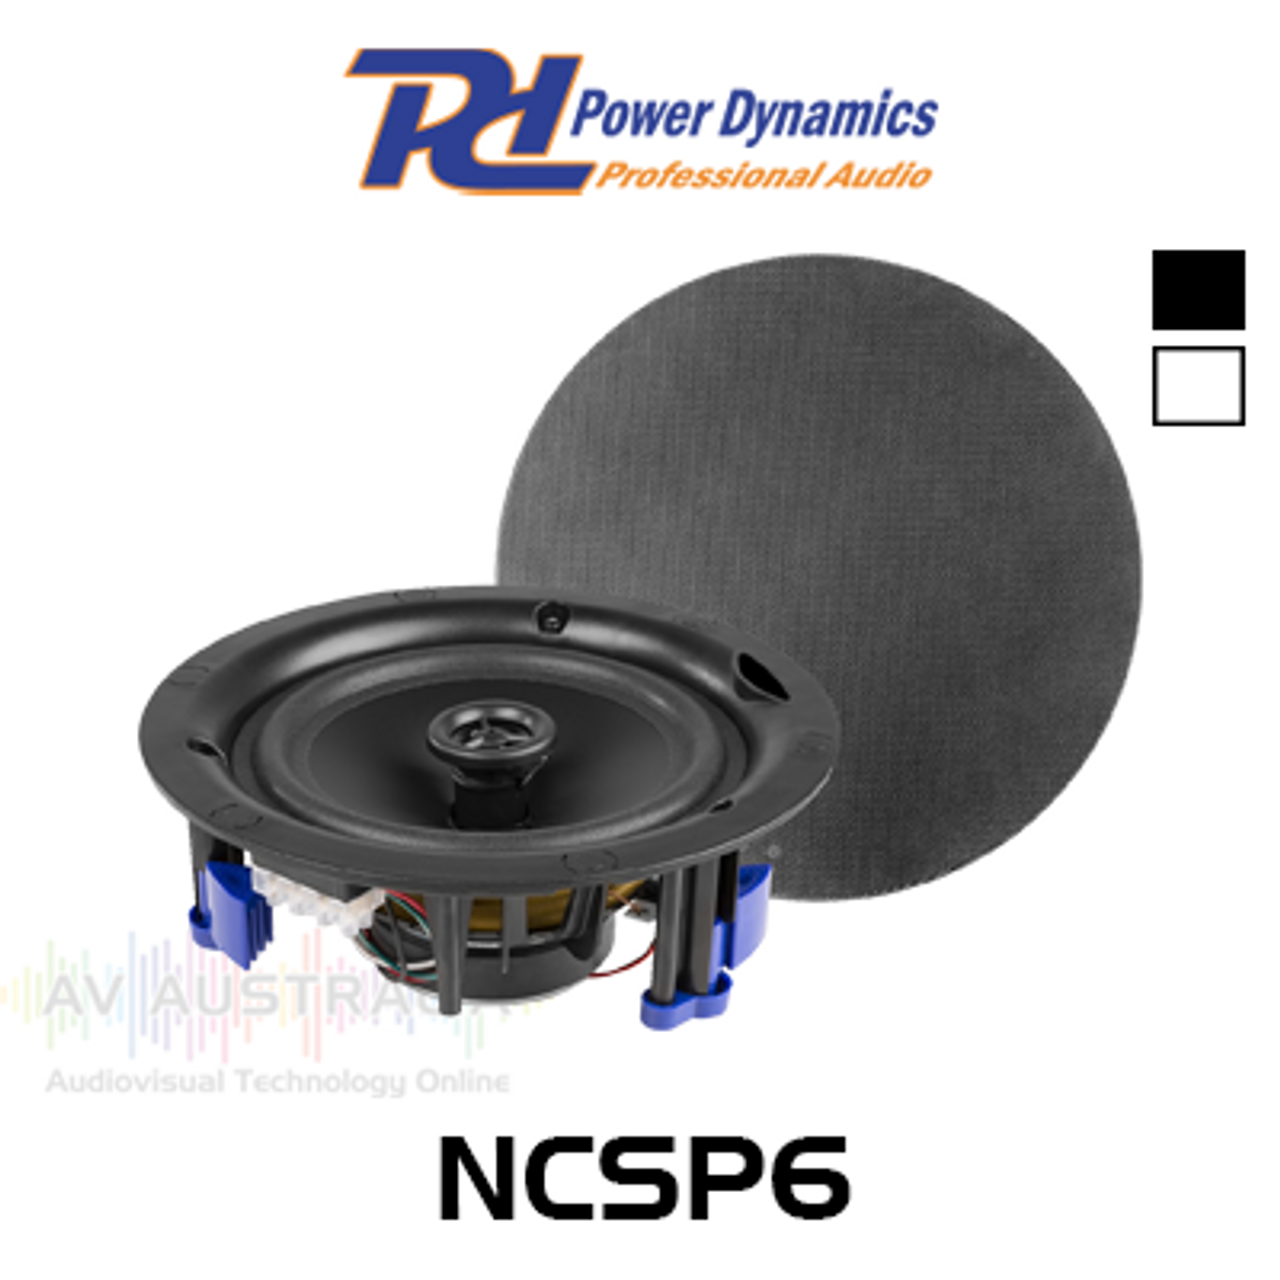 Power Dynamics NCSP6 6.5" Low Profile 100V In-Ceiling Speakers (Each)